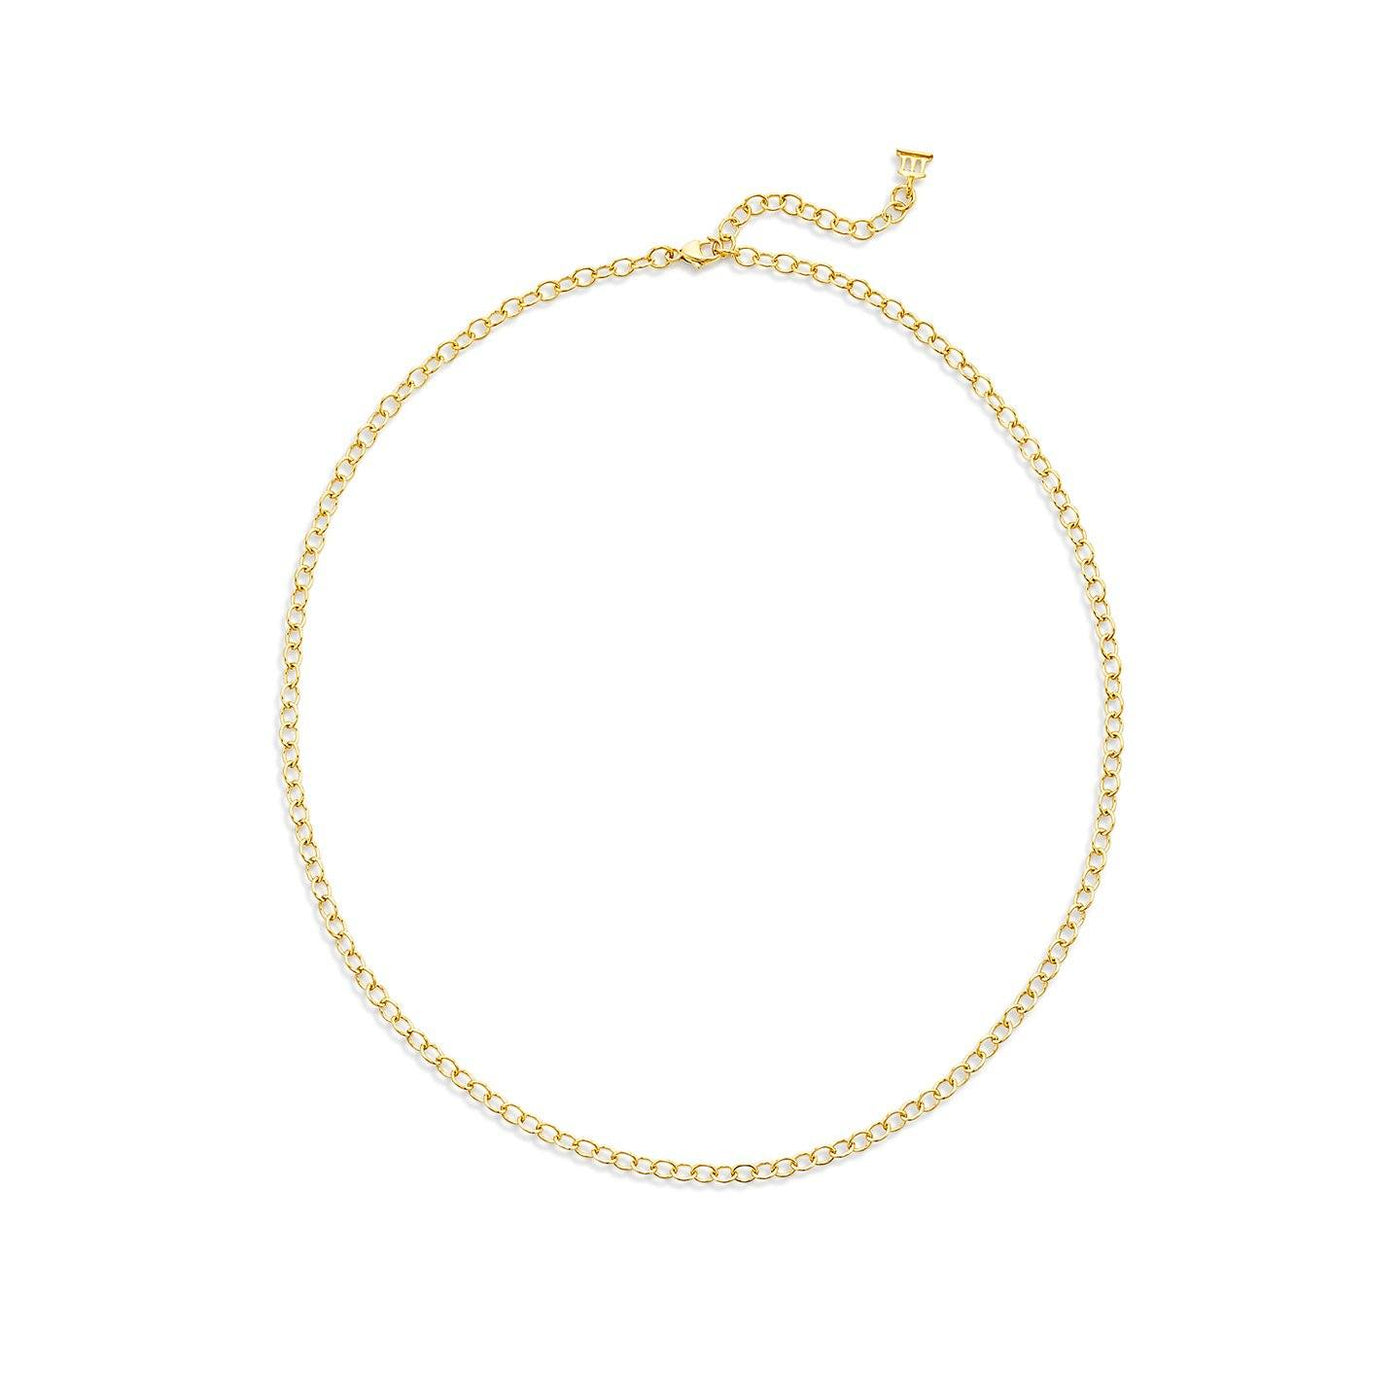 XS Oval Link Chain Necklace